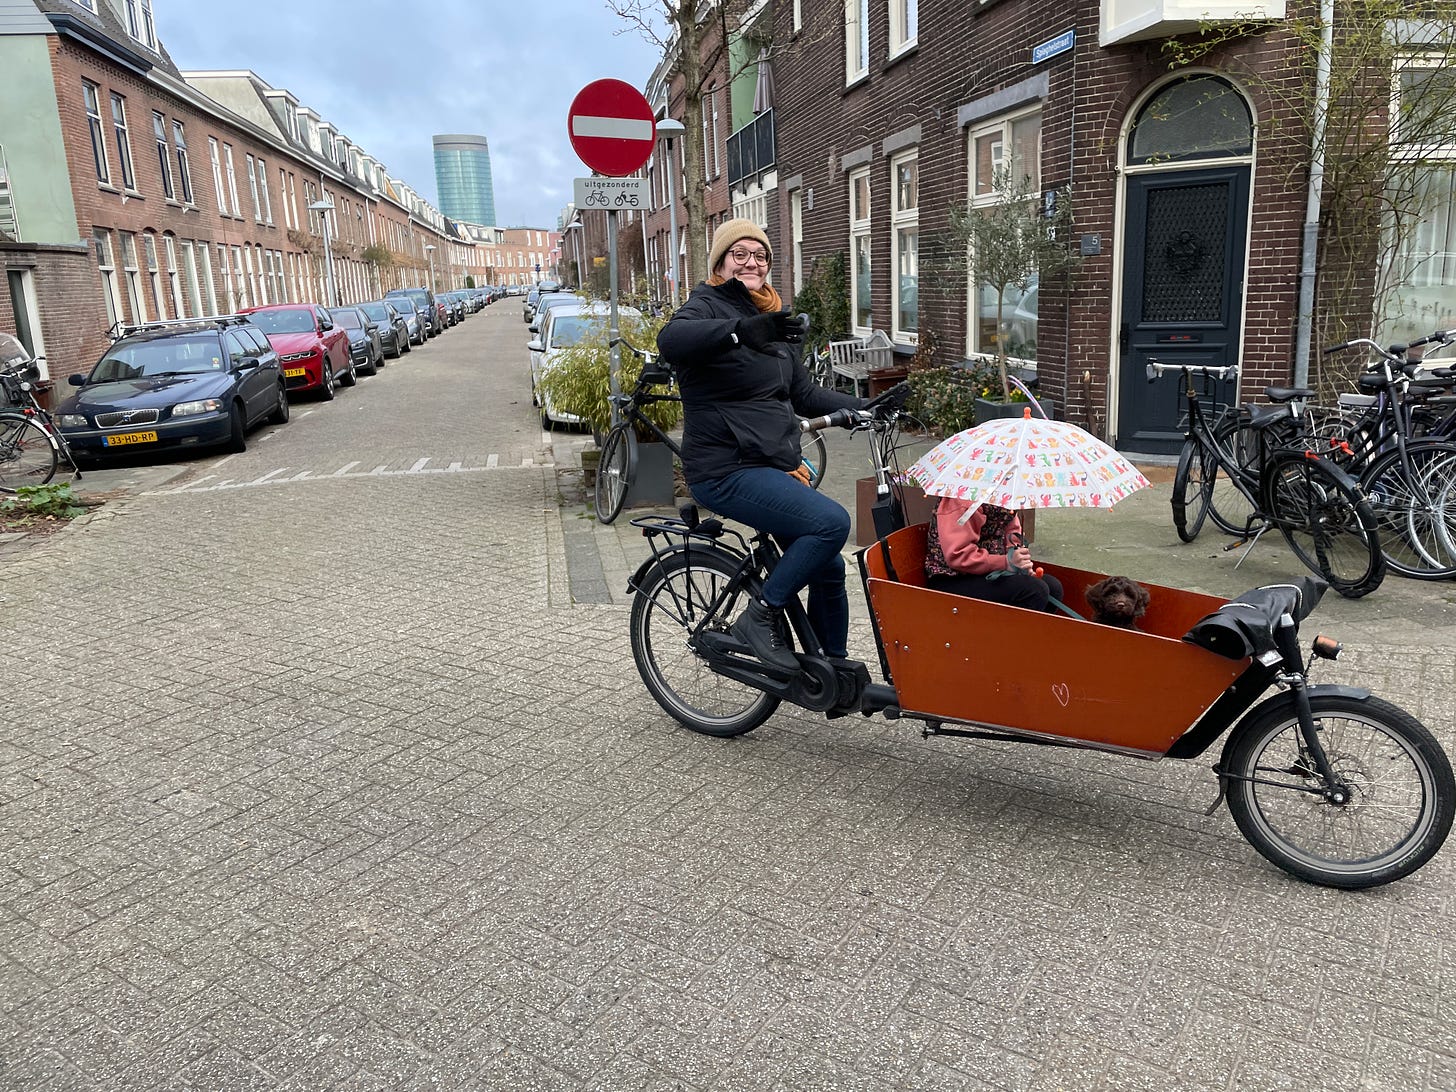 A woman rides a bakfiets cargobike down a dutch residential street. In the box are sat a young child and an adorable brown puppy